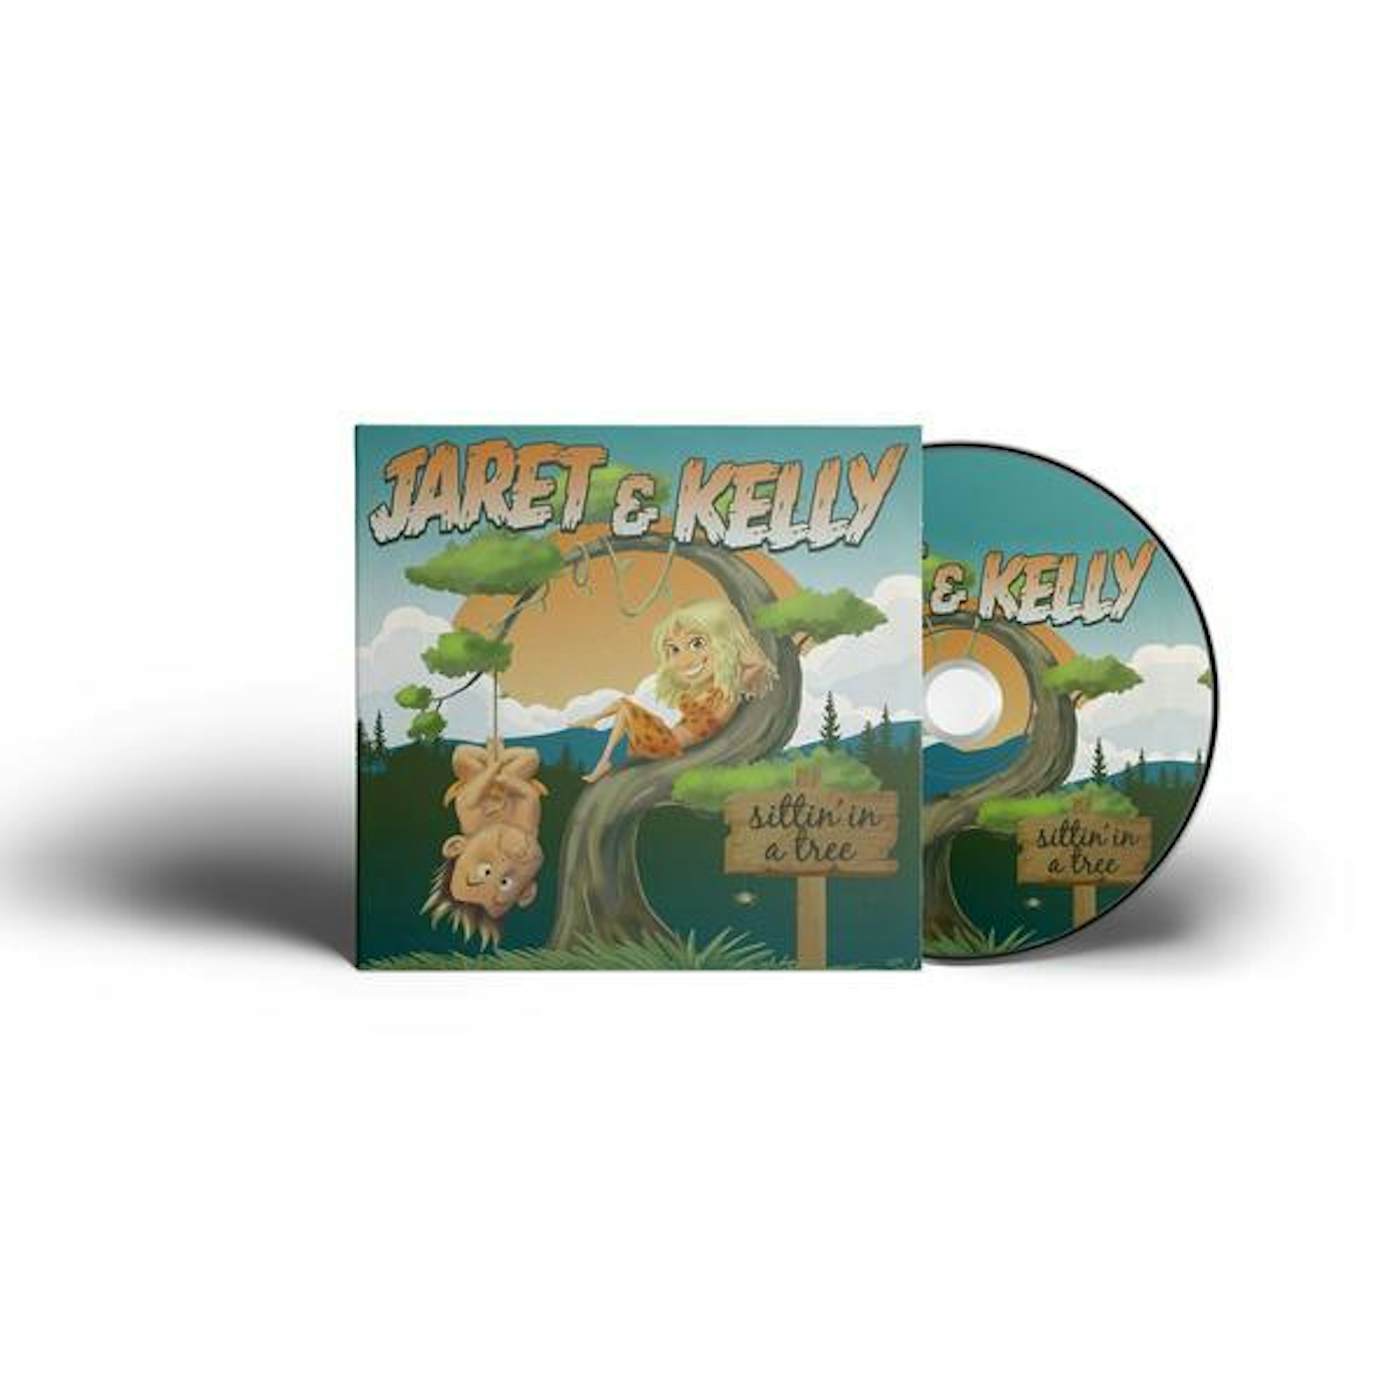 Jaret and Kelly - Sittin' in a Tree CD